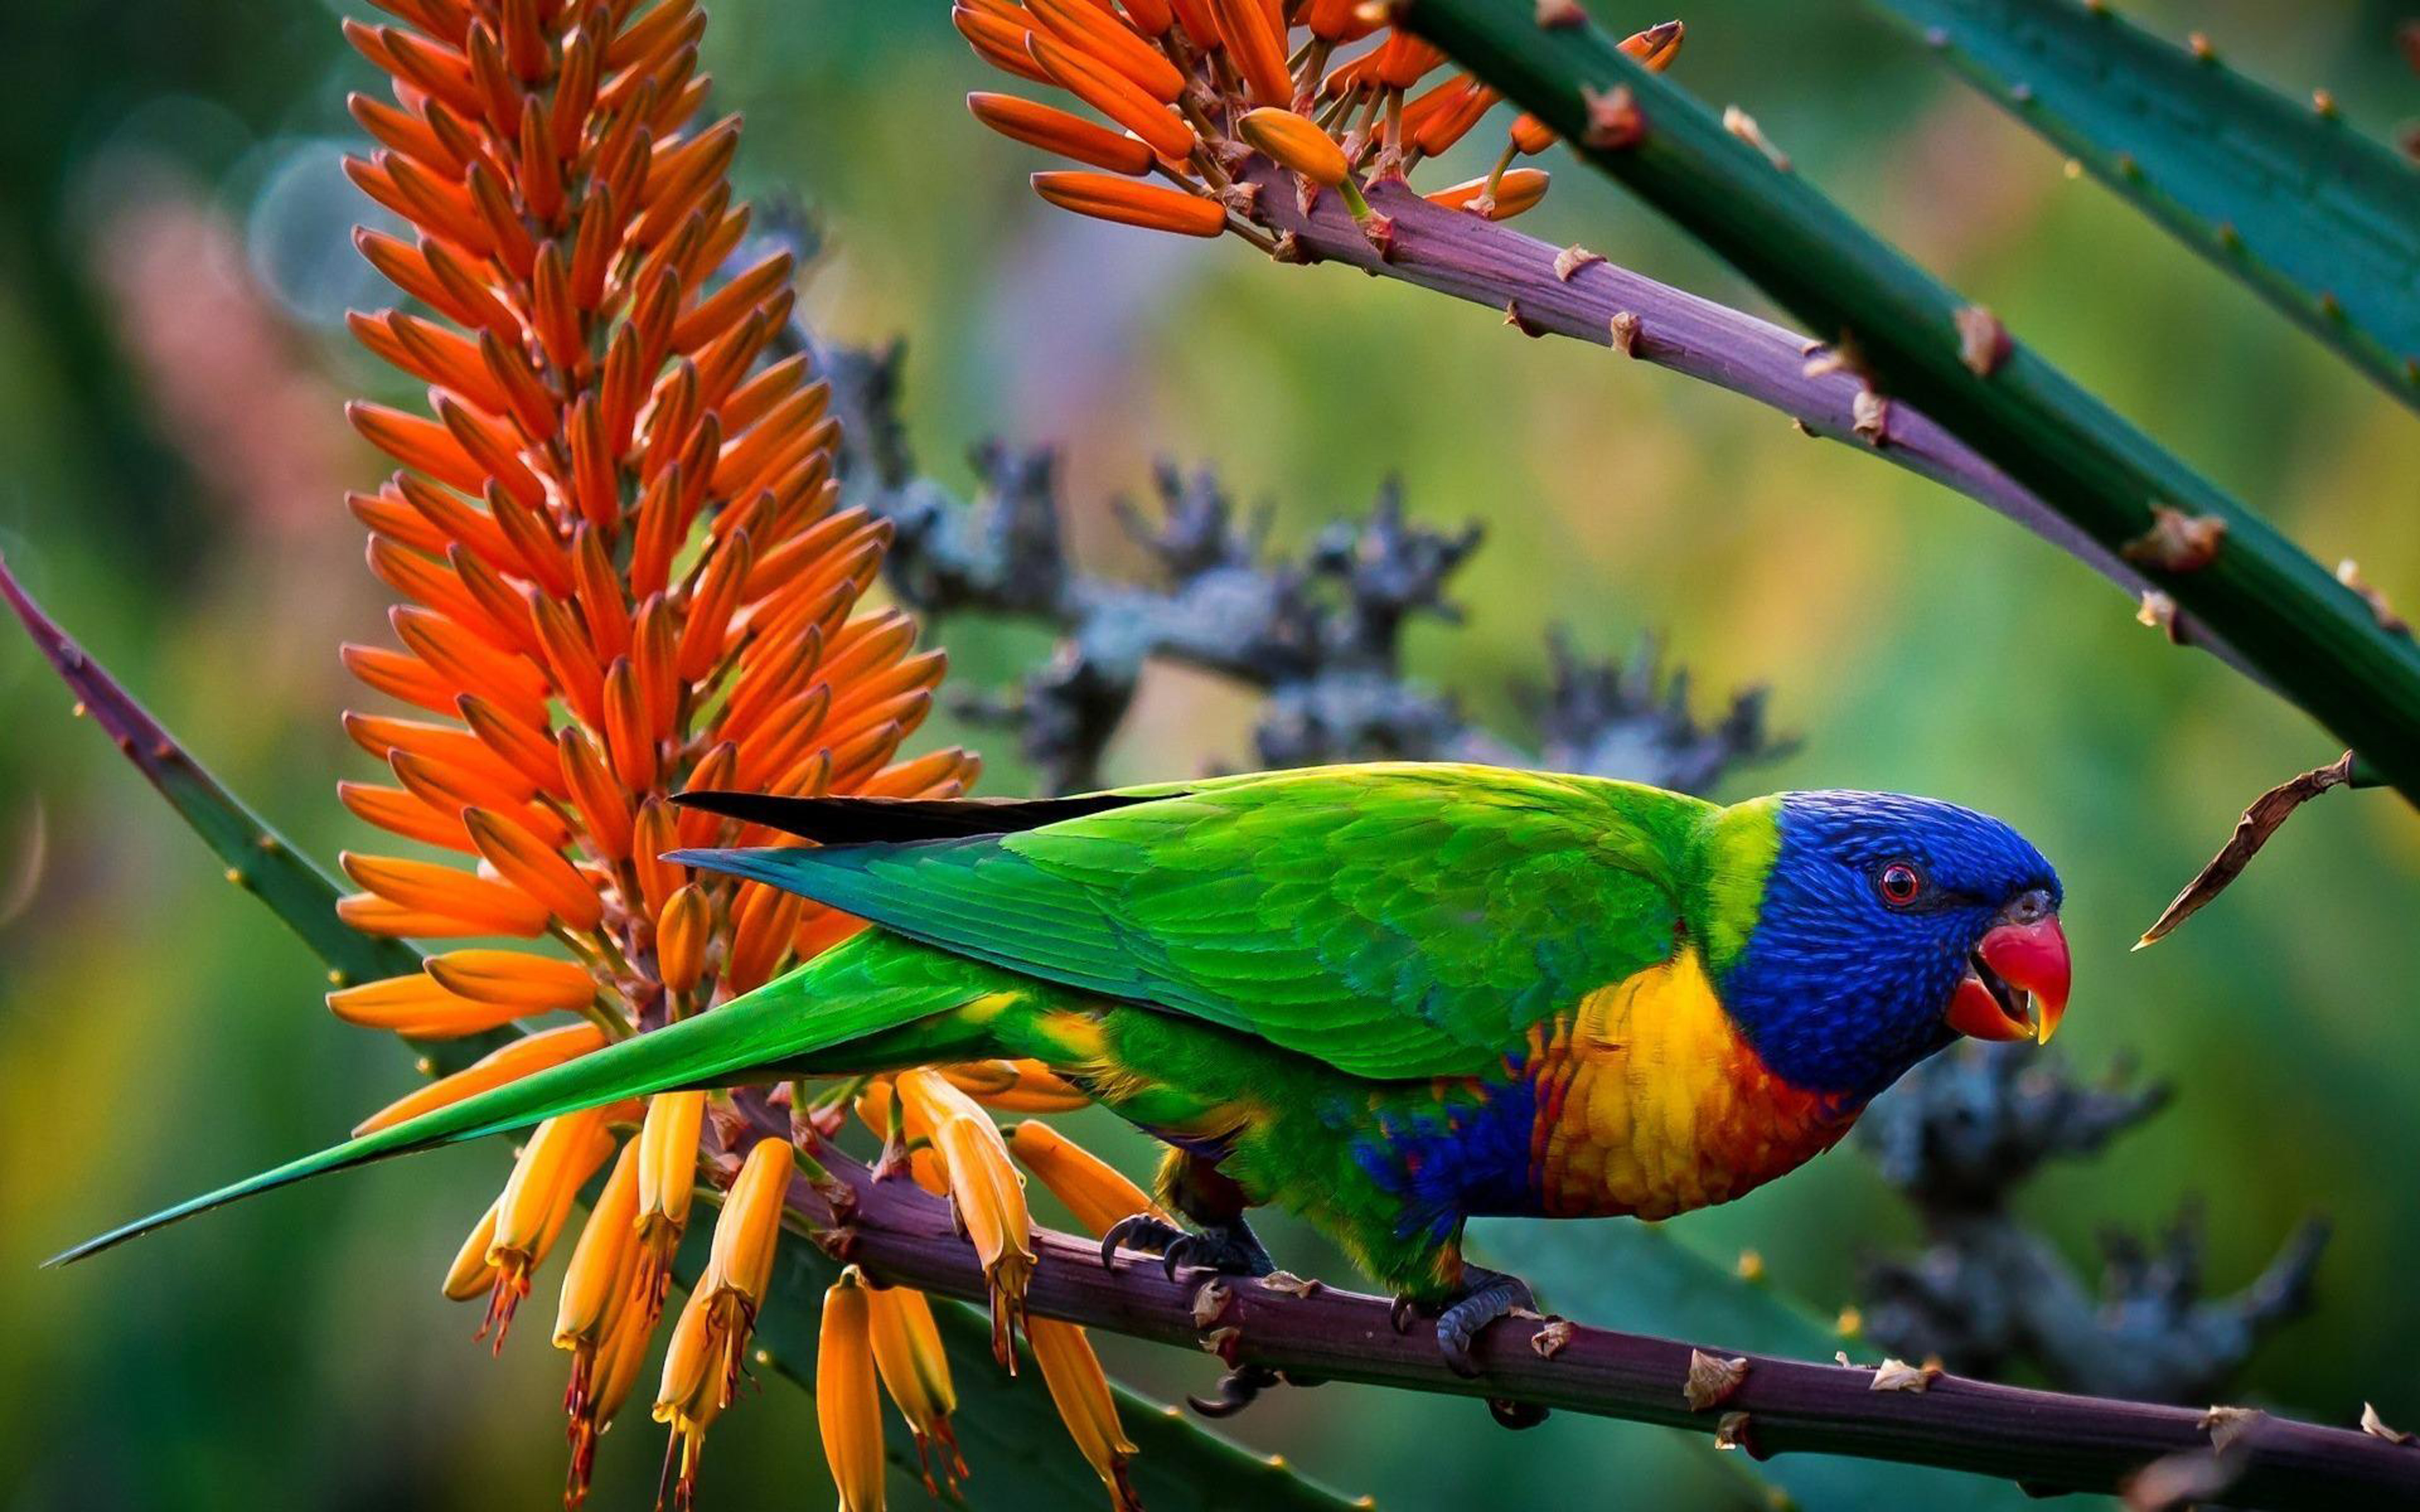 Colorful Parrot Wallpapers